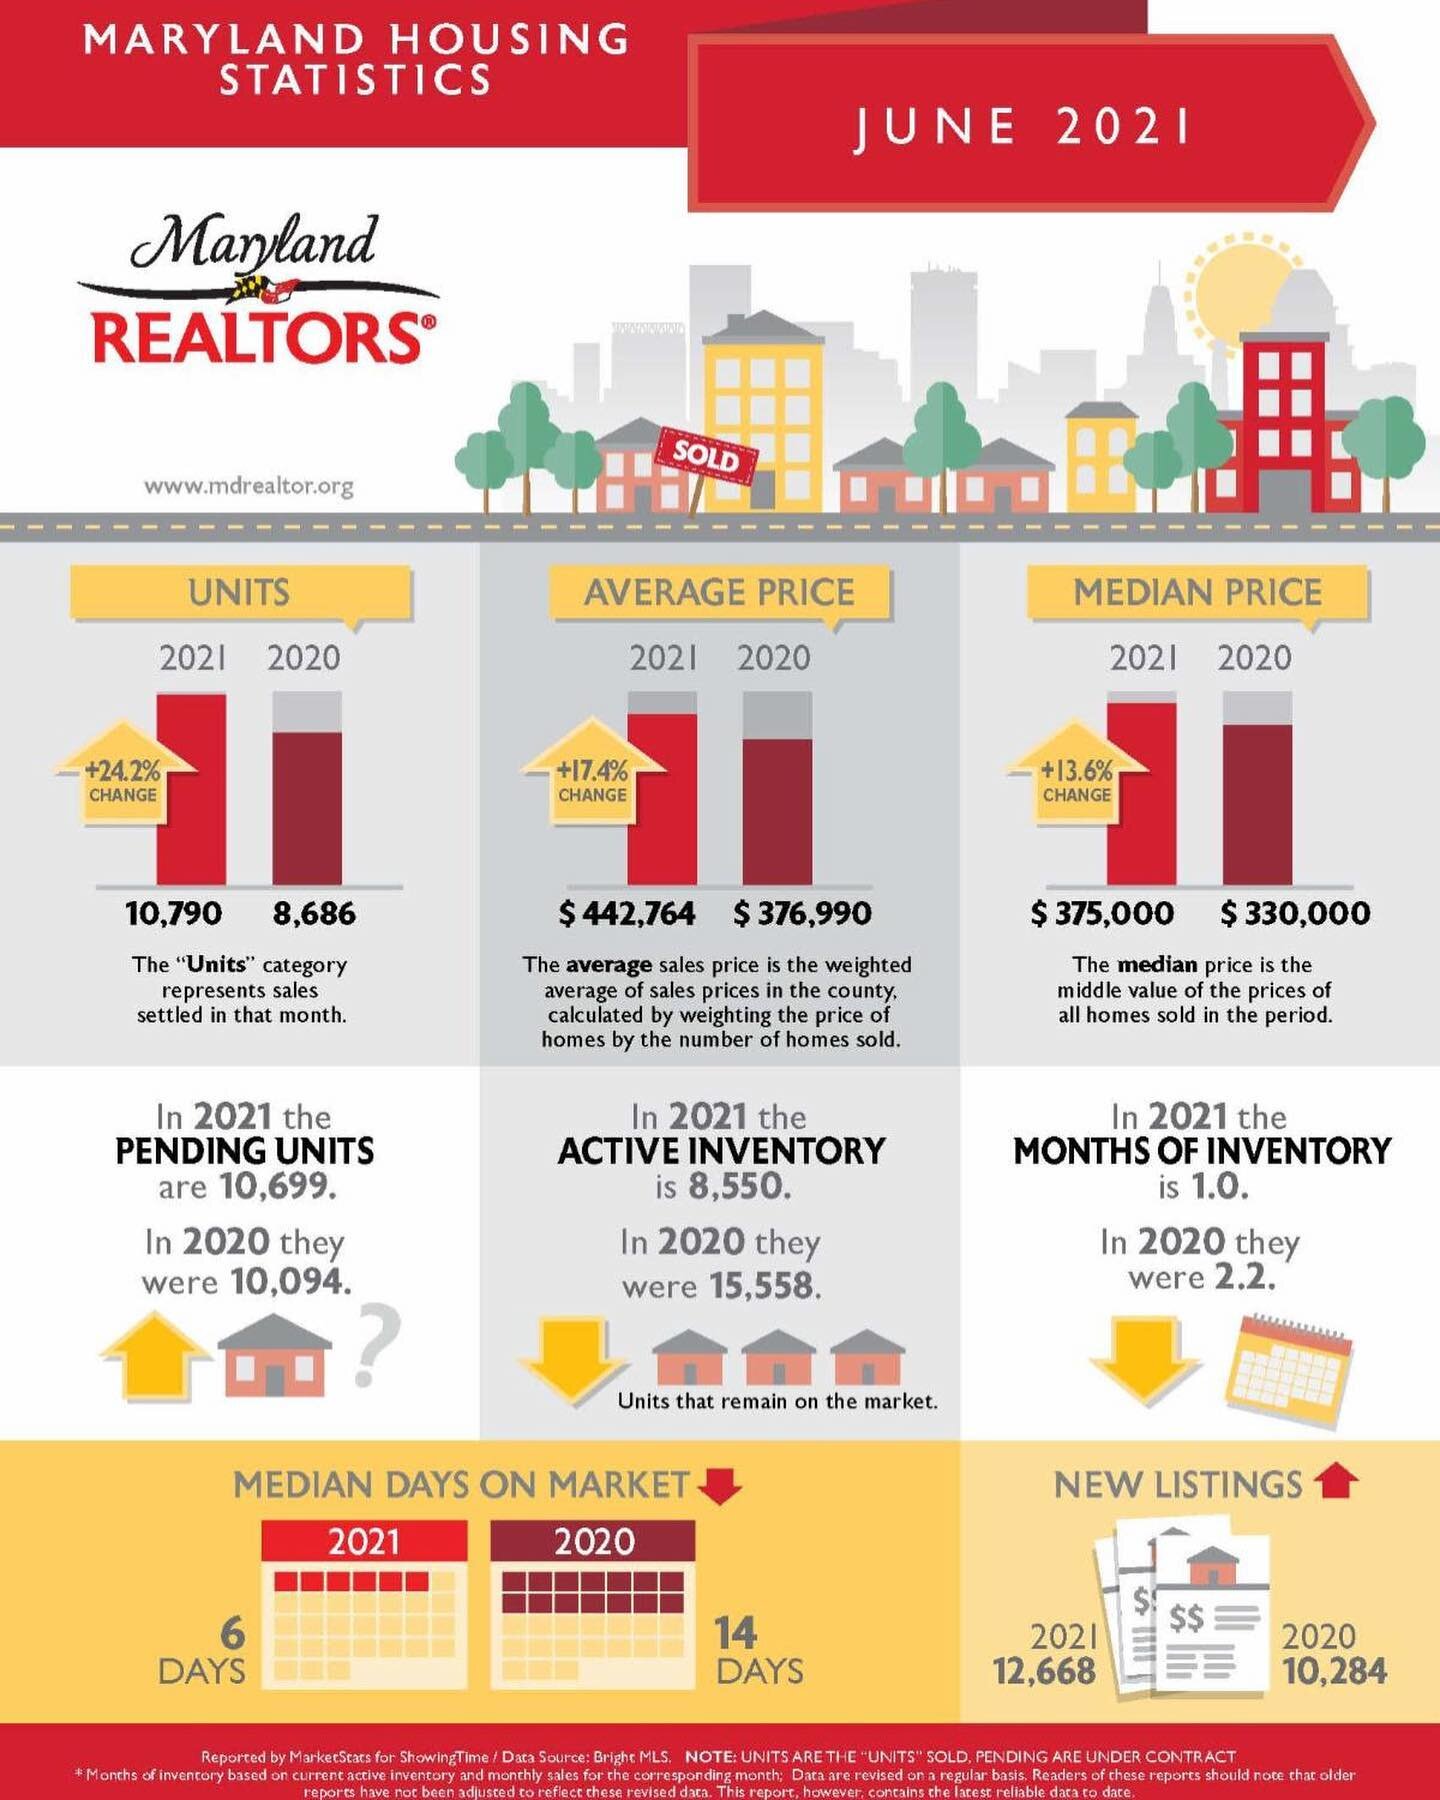 What a WILD ride the last year in real estate has been! The average sales price of a home is up over 17% from June of 2020! Great news for anyone thinking of selling their home! Additionally, there are 24% more homes on the market! So hopefully buyer